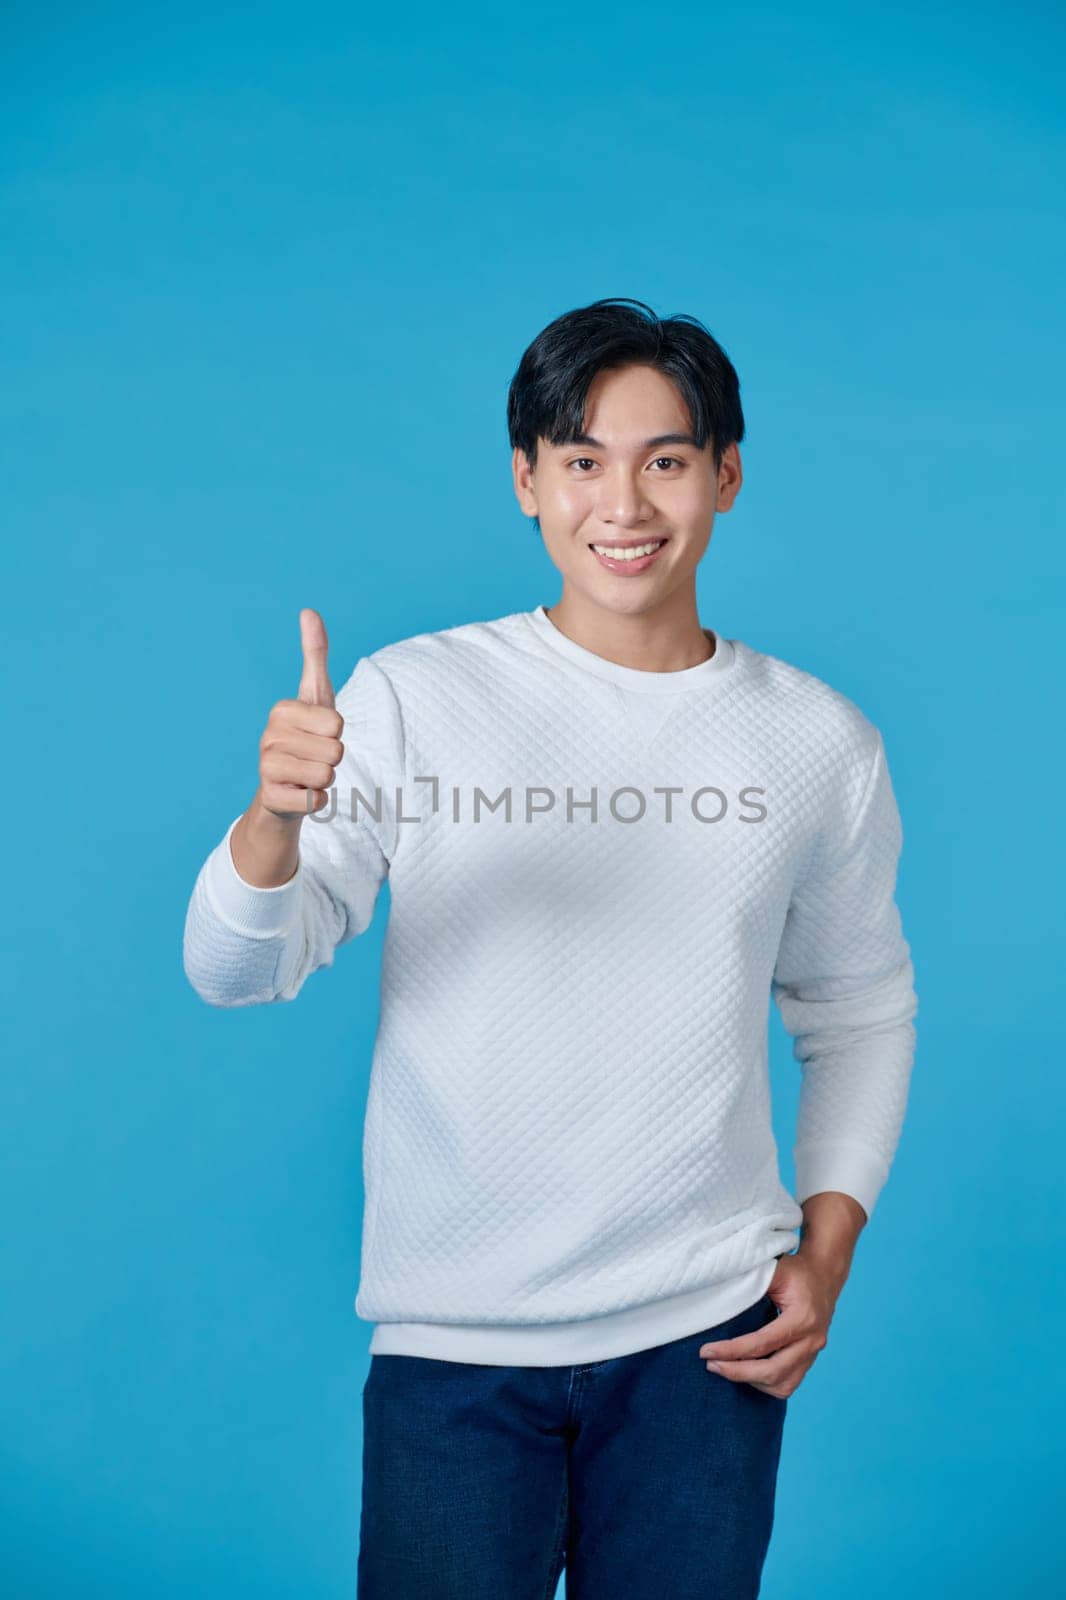 Smiling young asian man wearing white jumper and jeans on blue background giving thumbs up by makidotvn